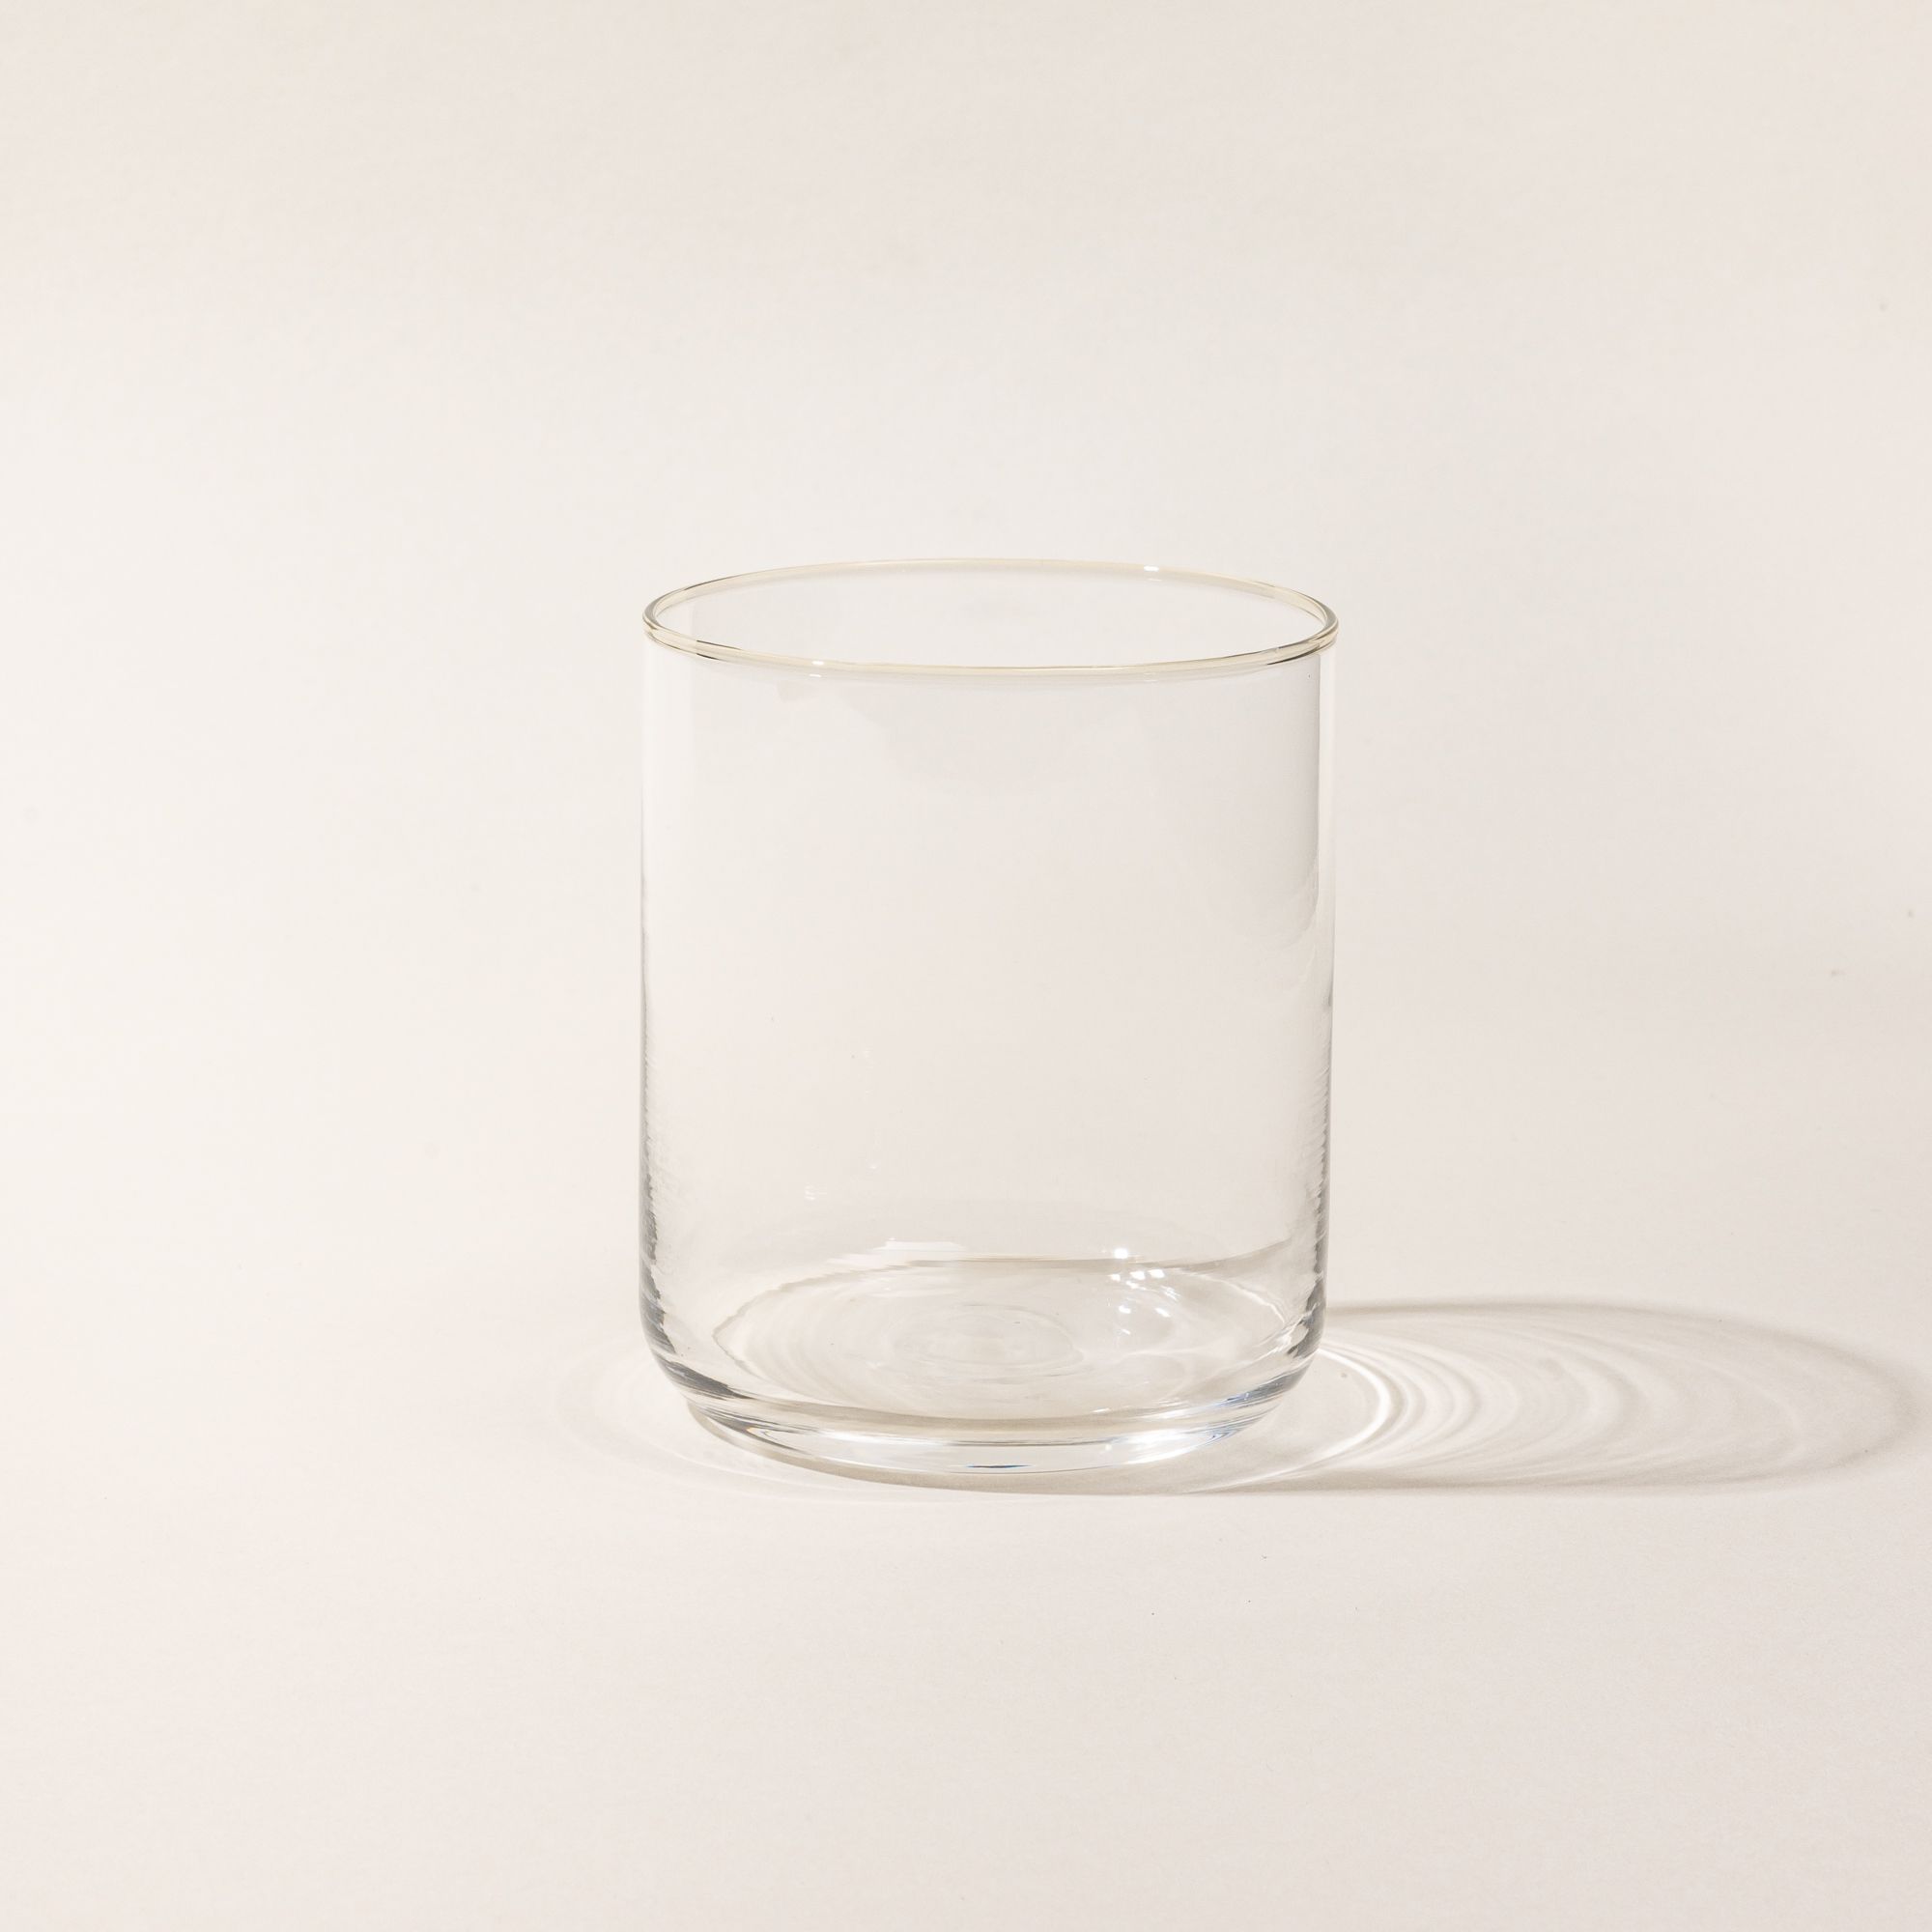 A straight walled short glass cup